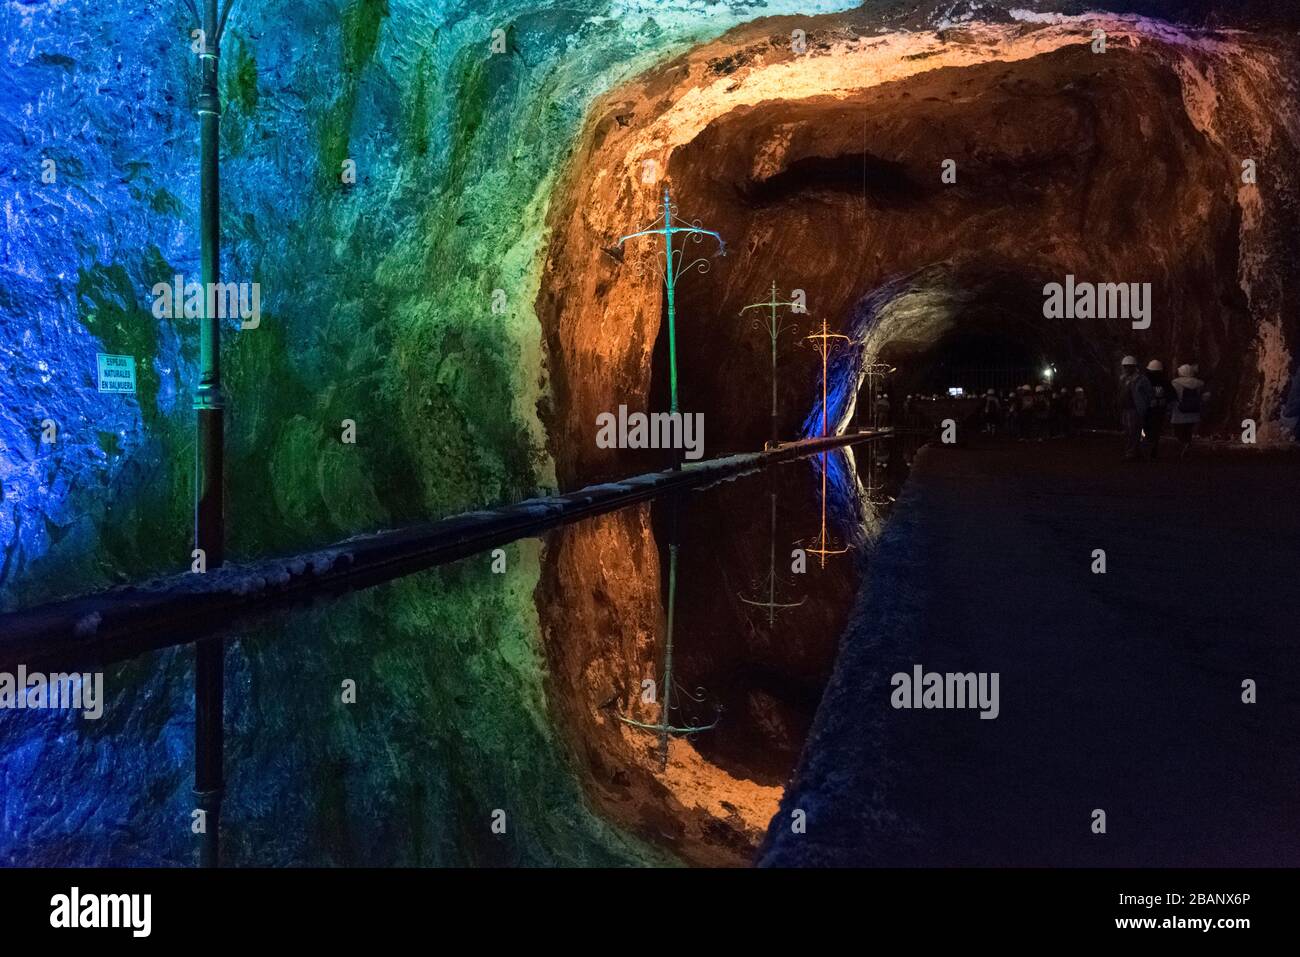 Nemocon, Cundinamarca / Colombia; March 24, 2018: mirror of water and walls illuminated with colored lights inside a salt mine Stock Photo